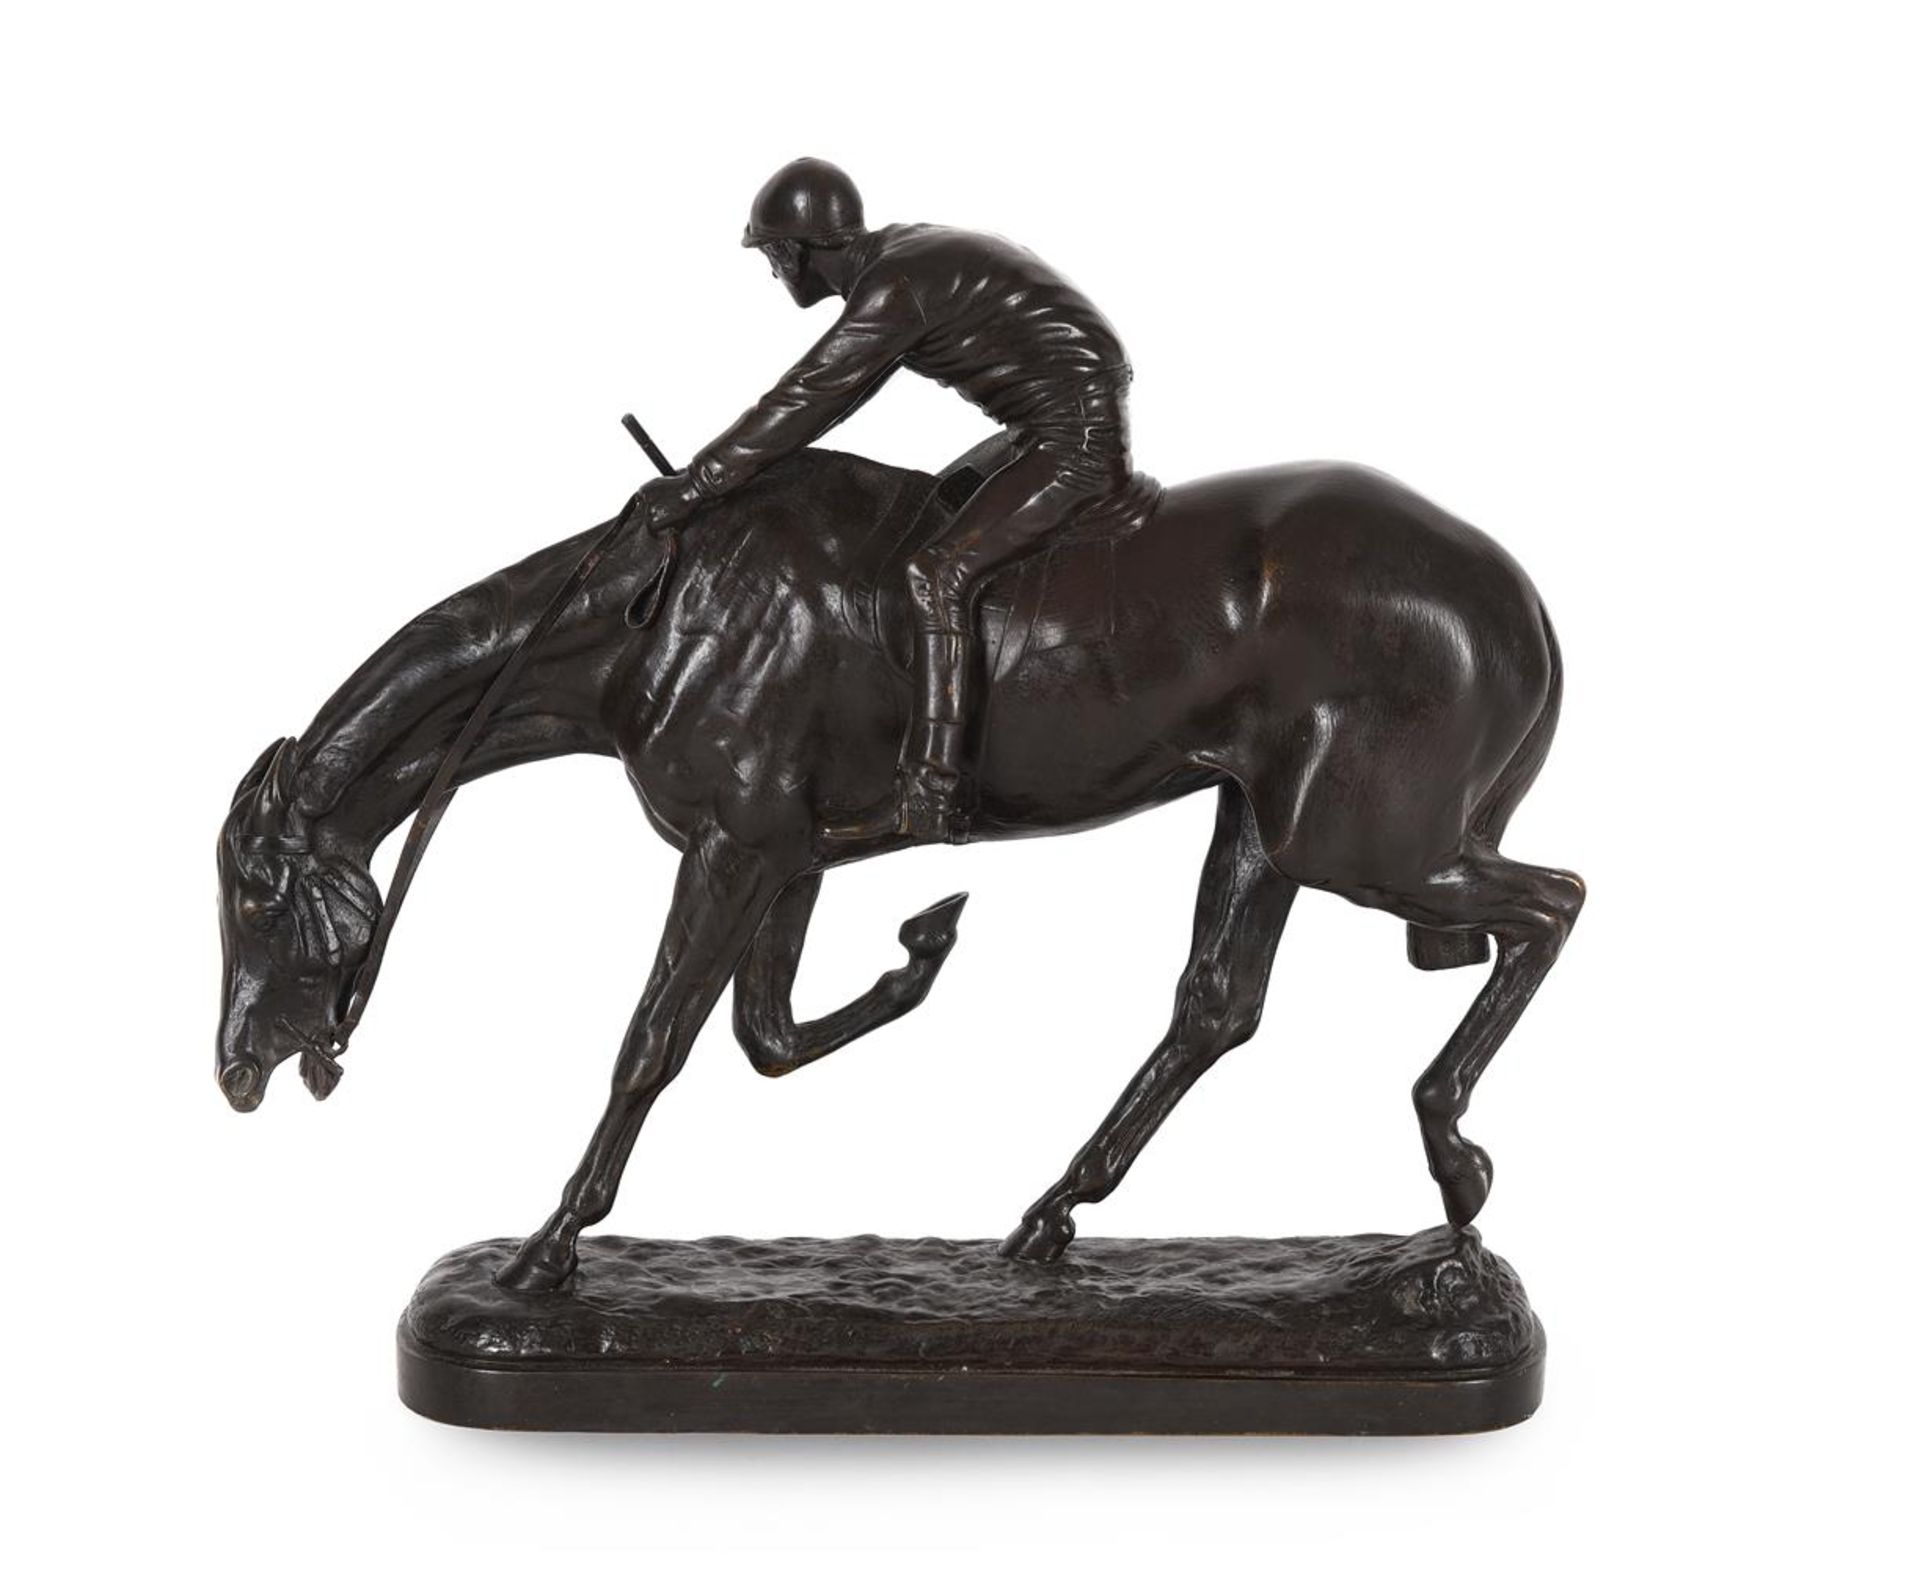 AFTER JOHN WILLIS GOOD (1847-1879), AN EQUESTRIAN BRONZE 'AFTER THE RACE', EARLY 20TH CENTURY - Image 2 of 4